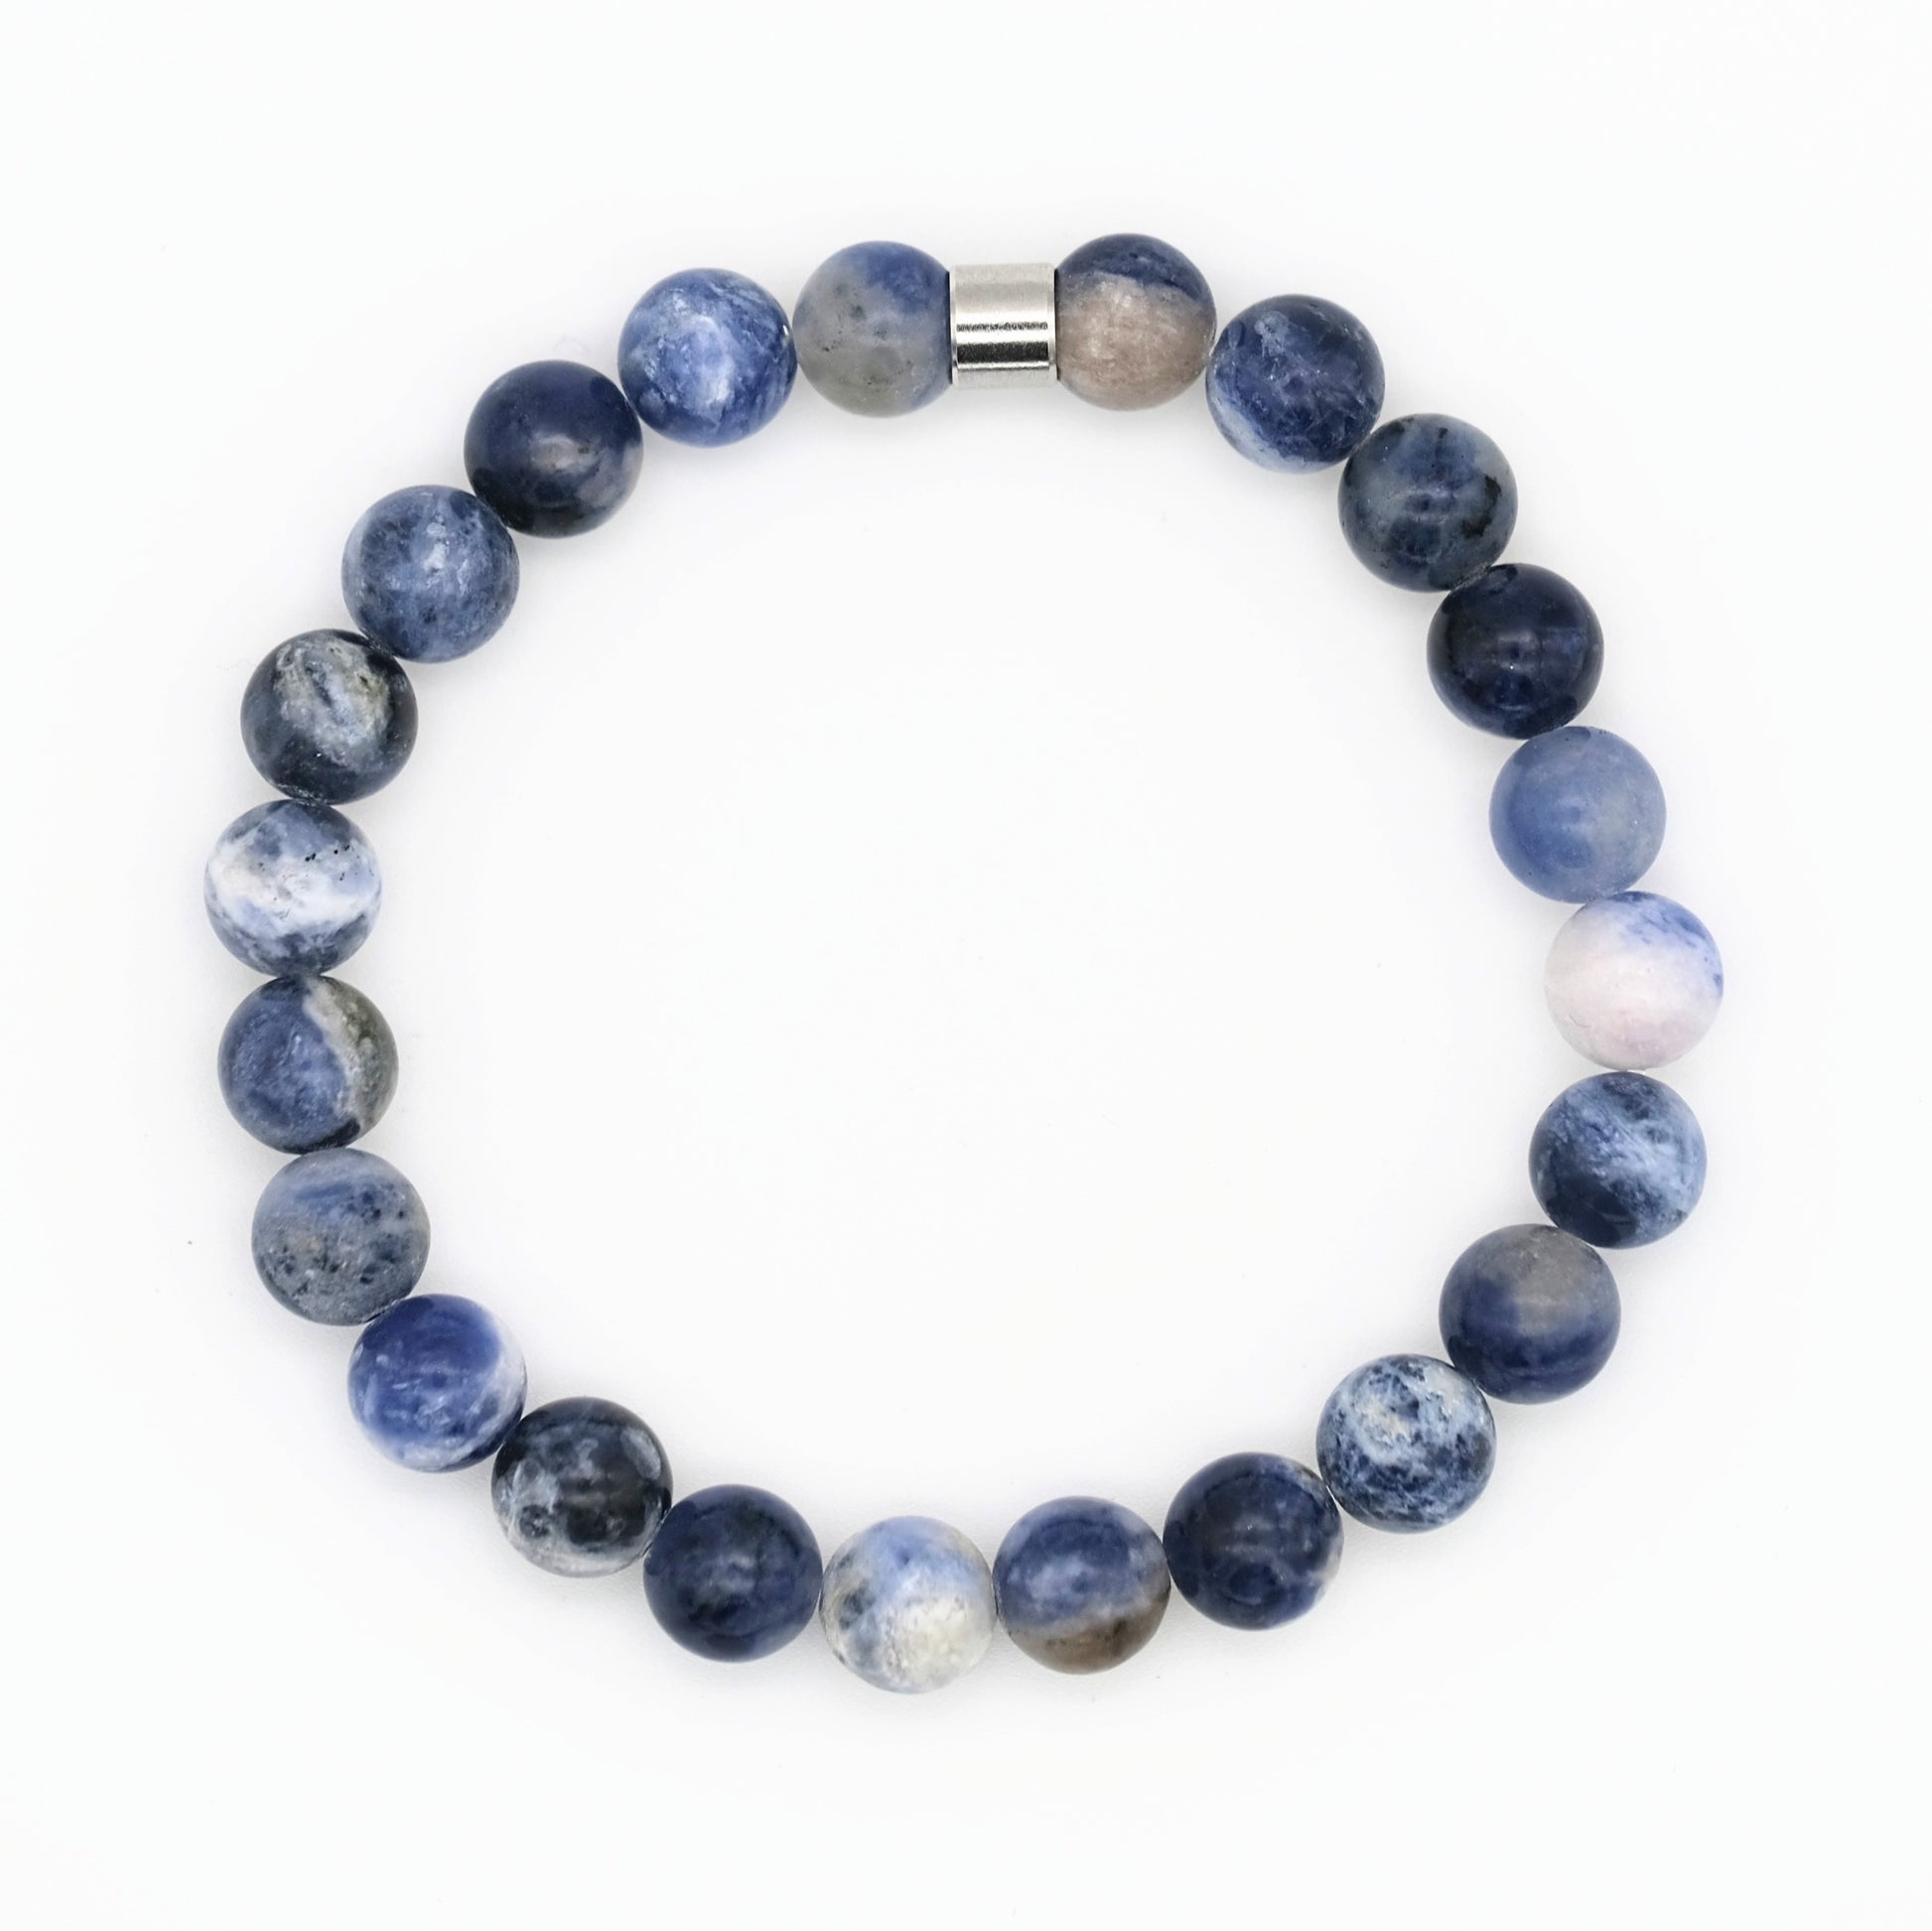 Sodalite gemstone bracelet with stainless steel accessory from above